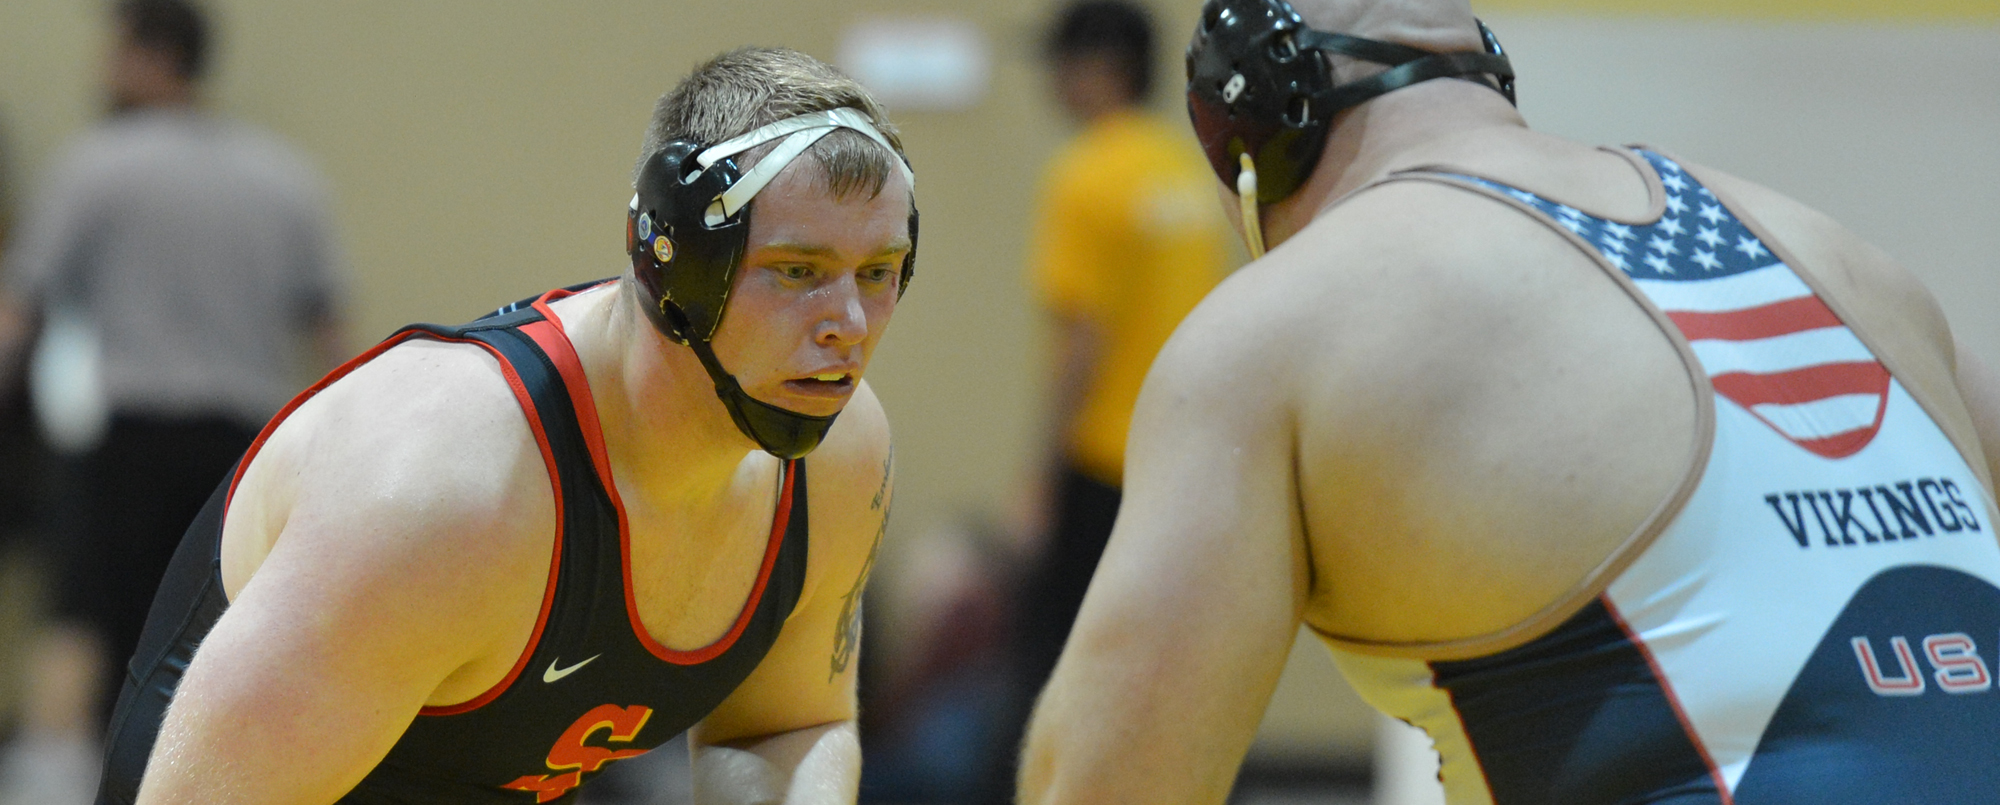 Colby Vlieger earned his 20th win of the season in Simpson's 29-19 loss to Dubuque on Jan. 28.